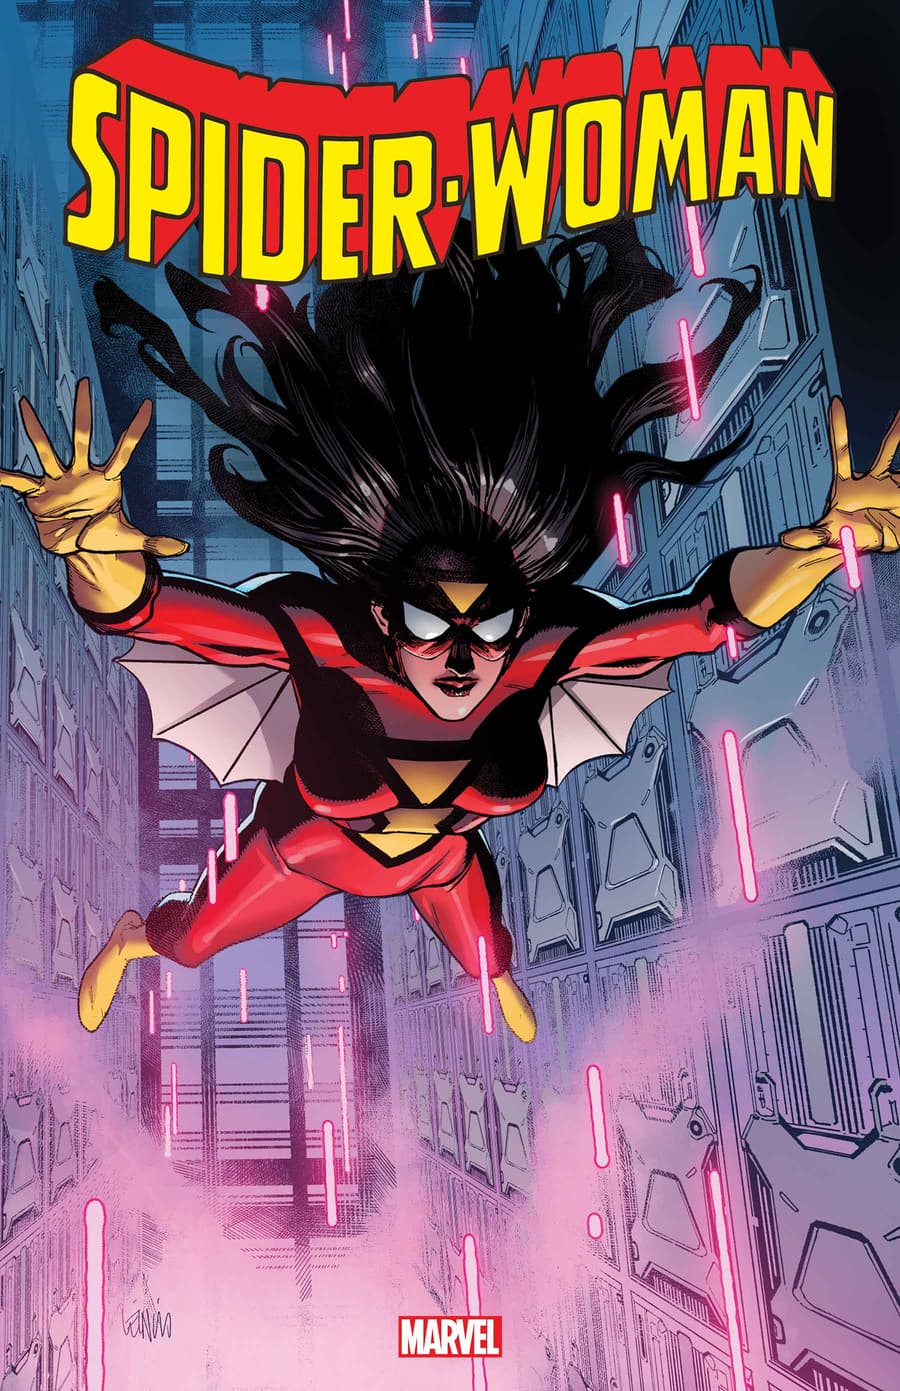 SPIDER-WOMAN #2 cover by Leinil Francis Yu